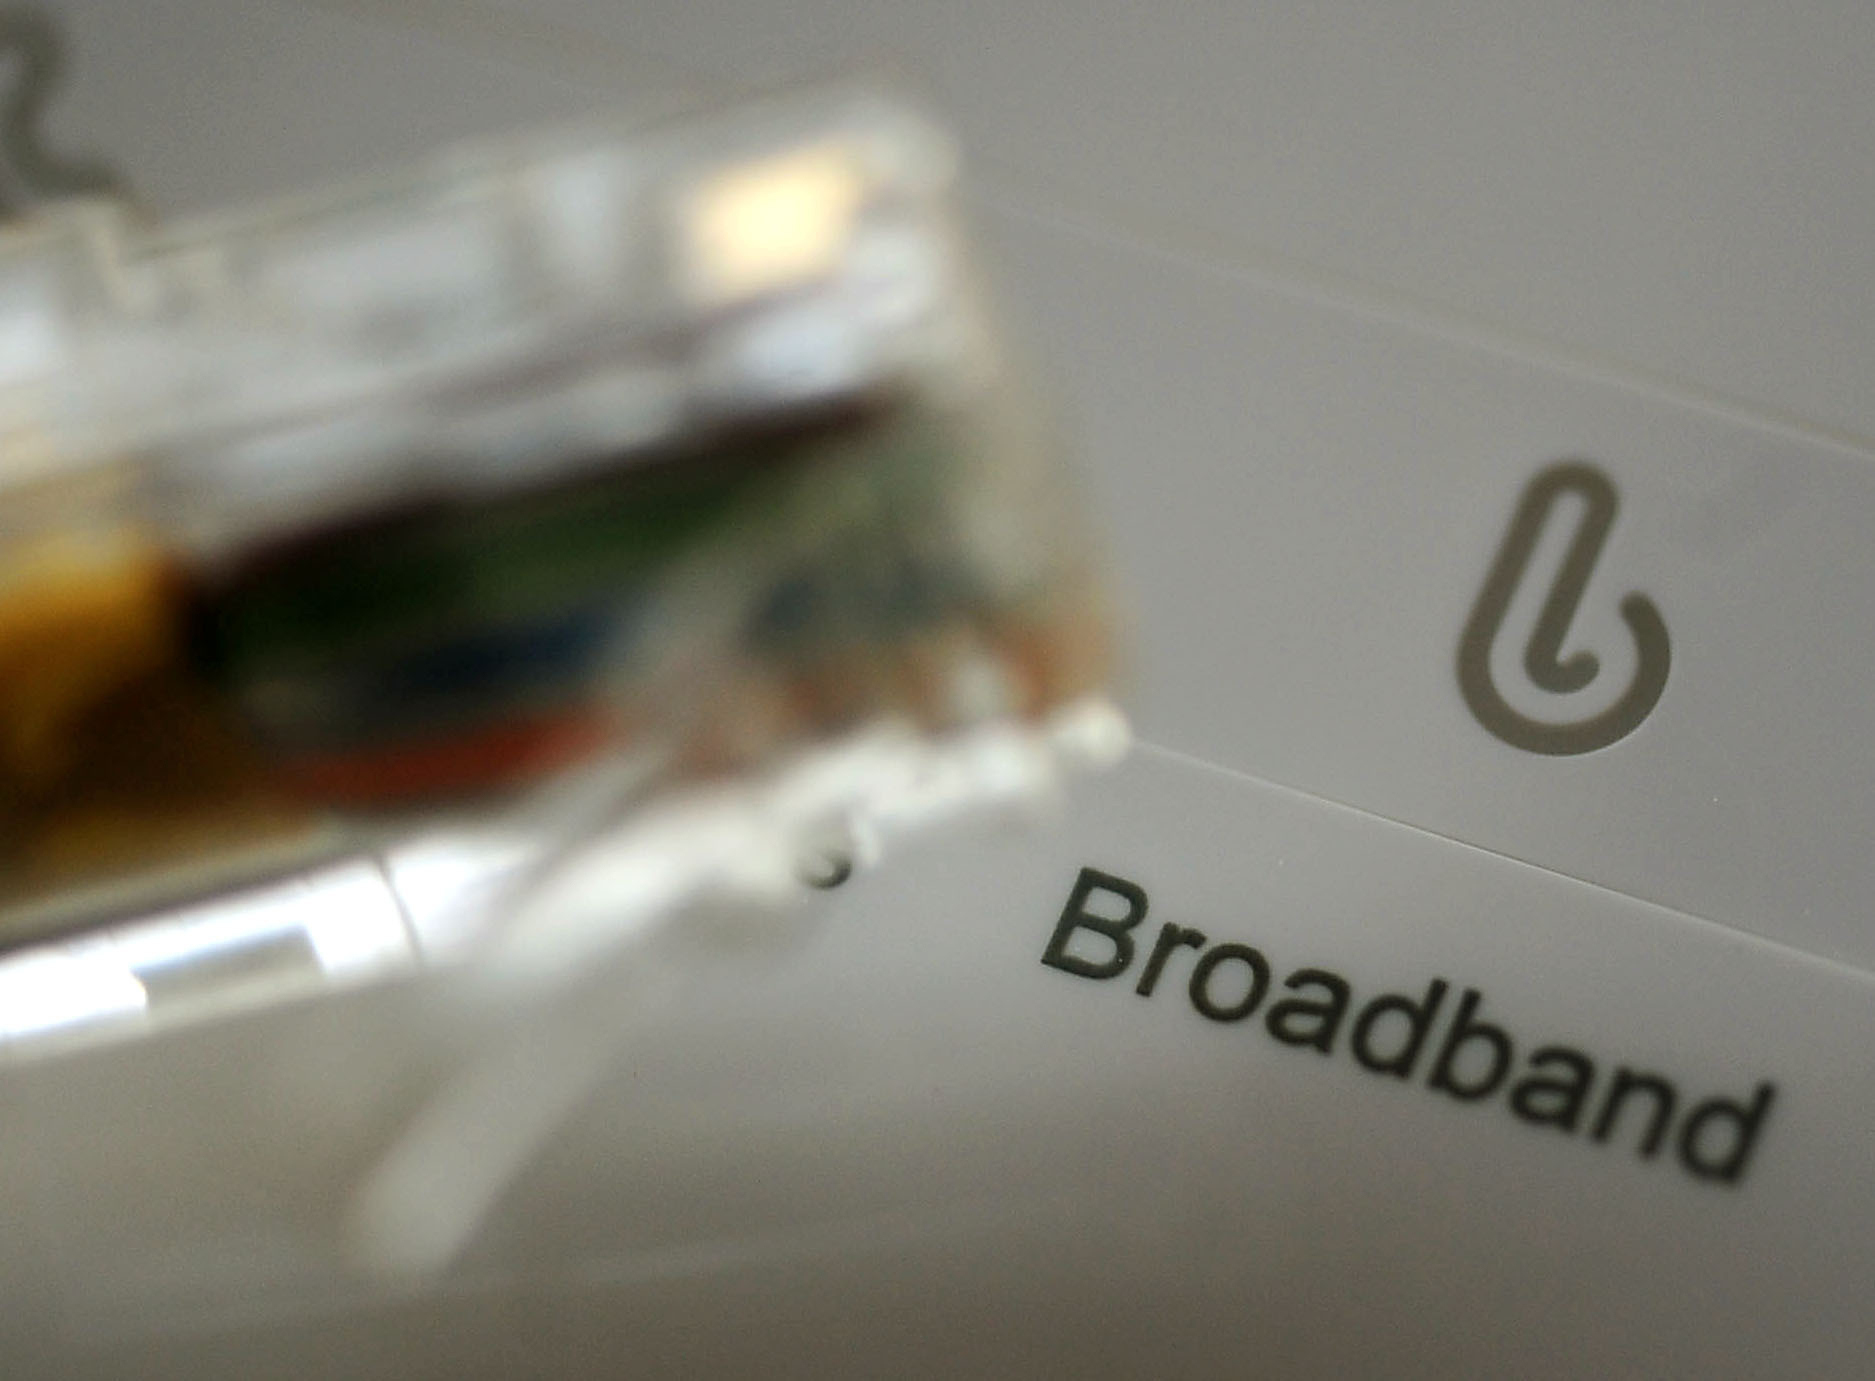 Current standards allow firms to advertise "up to" speeds as long as they are available to a minimum of just 10% of customers, resulting in widespread complaints from government, consumer groups and the public. (Rui Vieira/PA Wire)